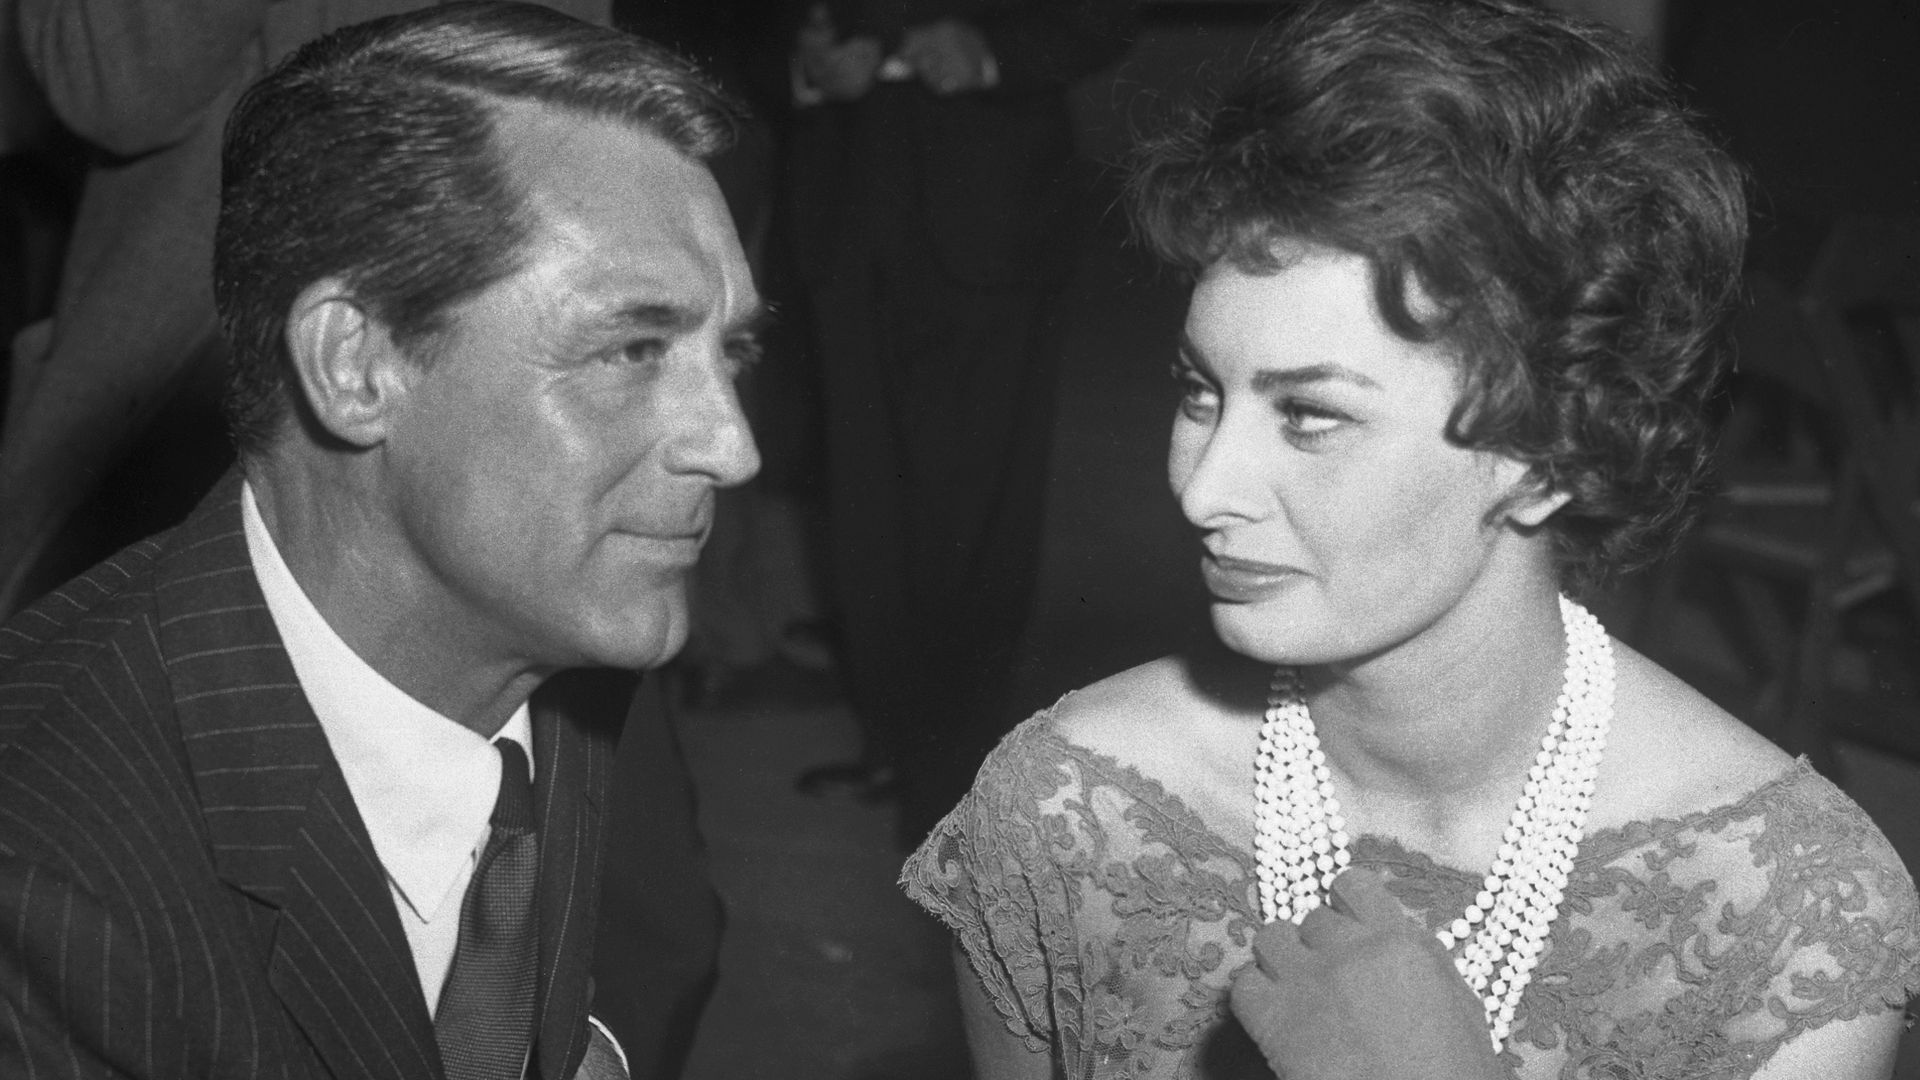 Sophia Loren with a pearl necklace sitting at a table with Cary Grant